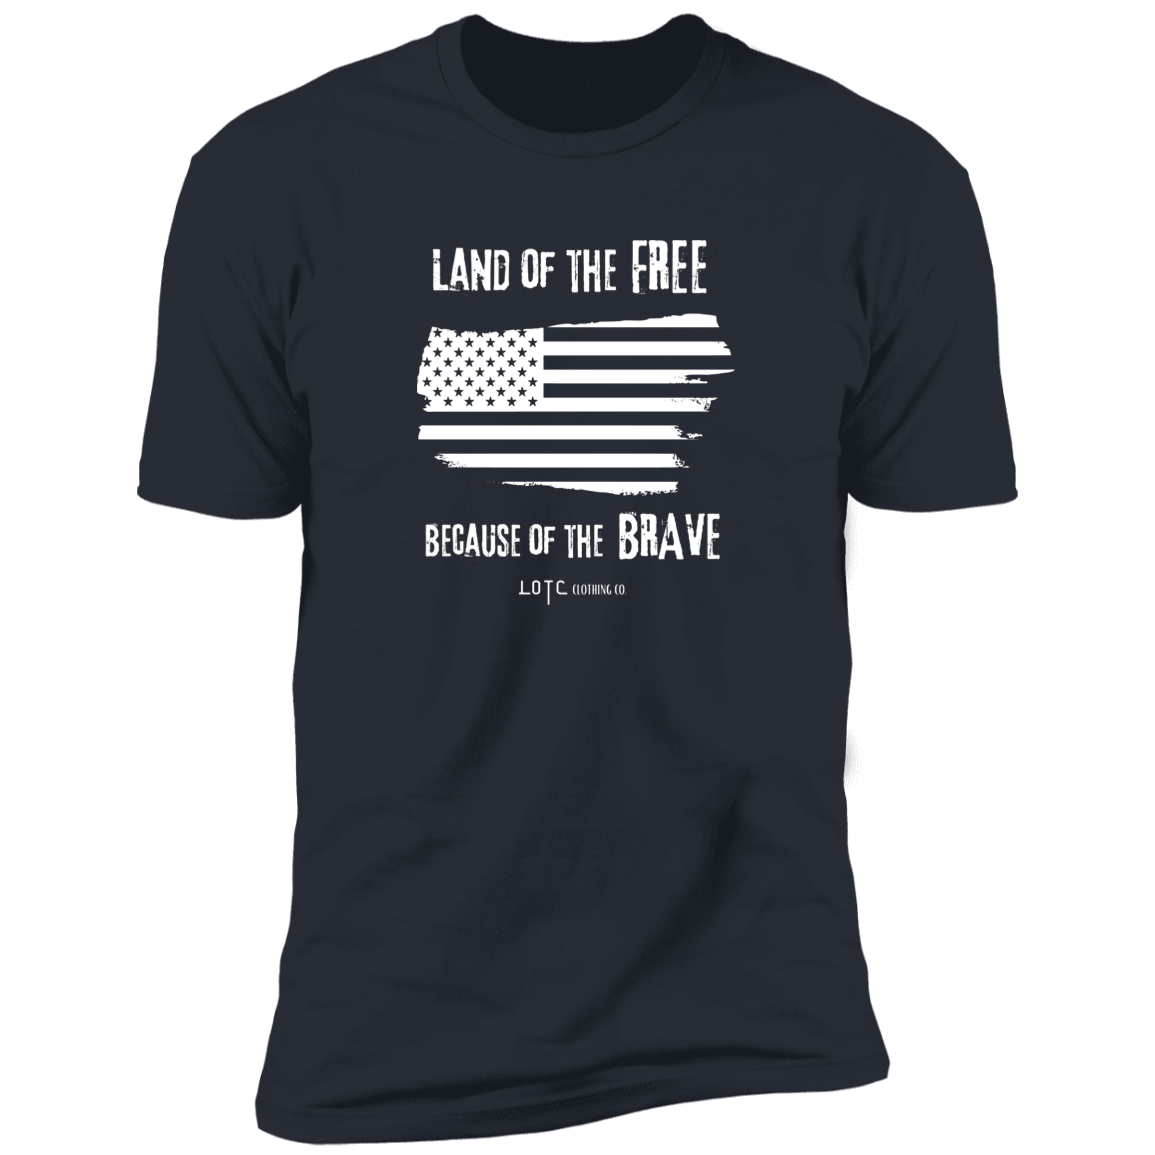 Because Of The Brave Tee